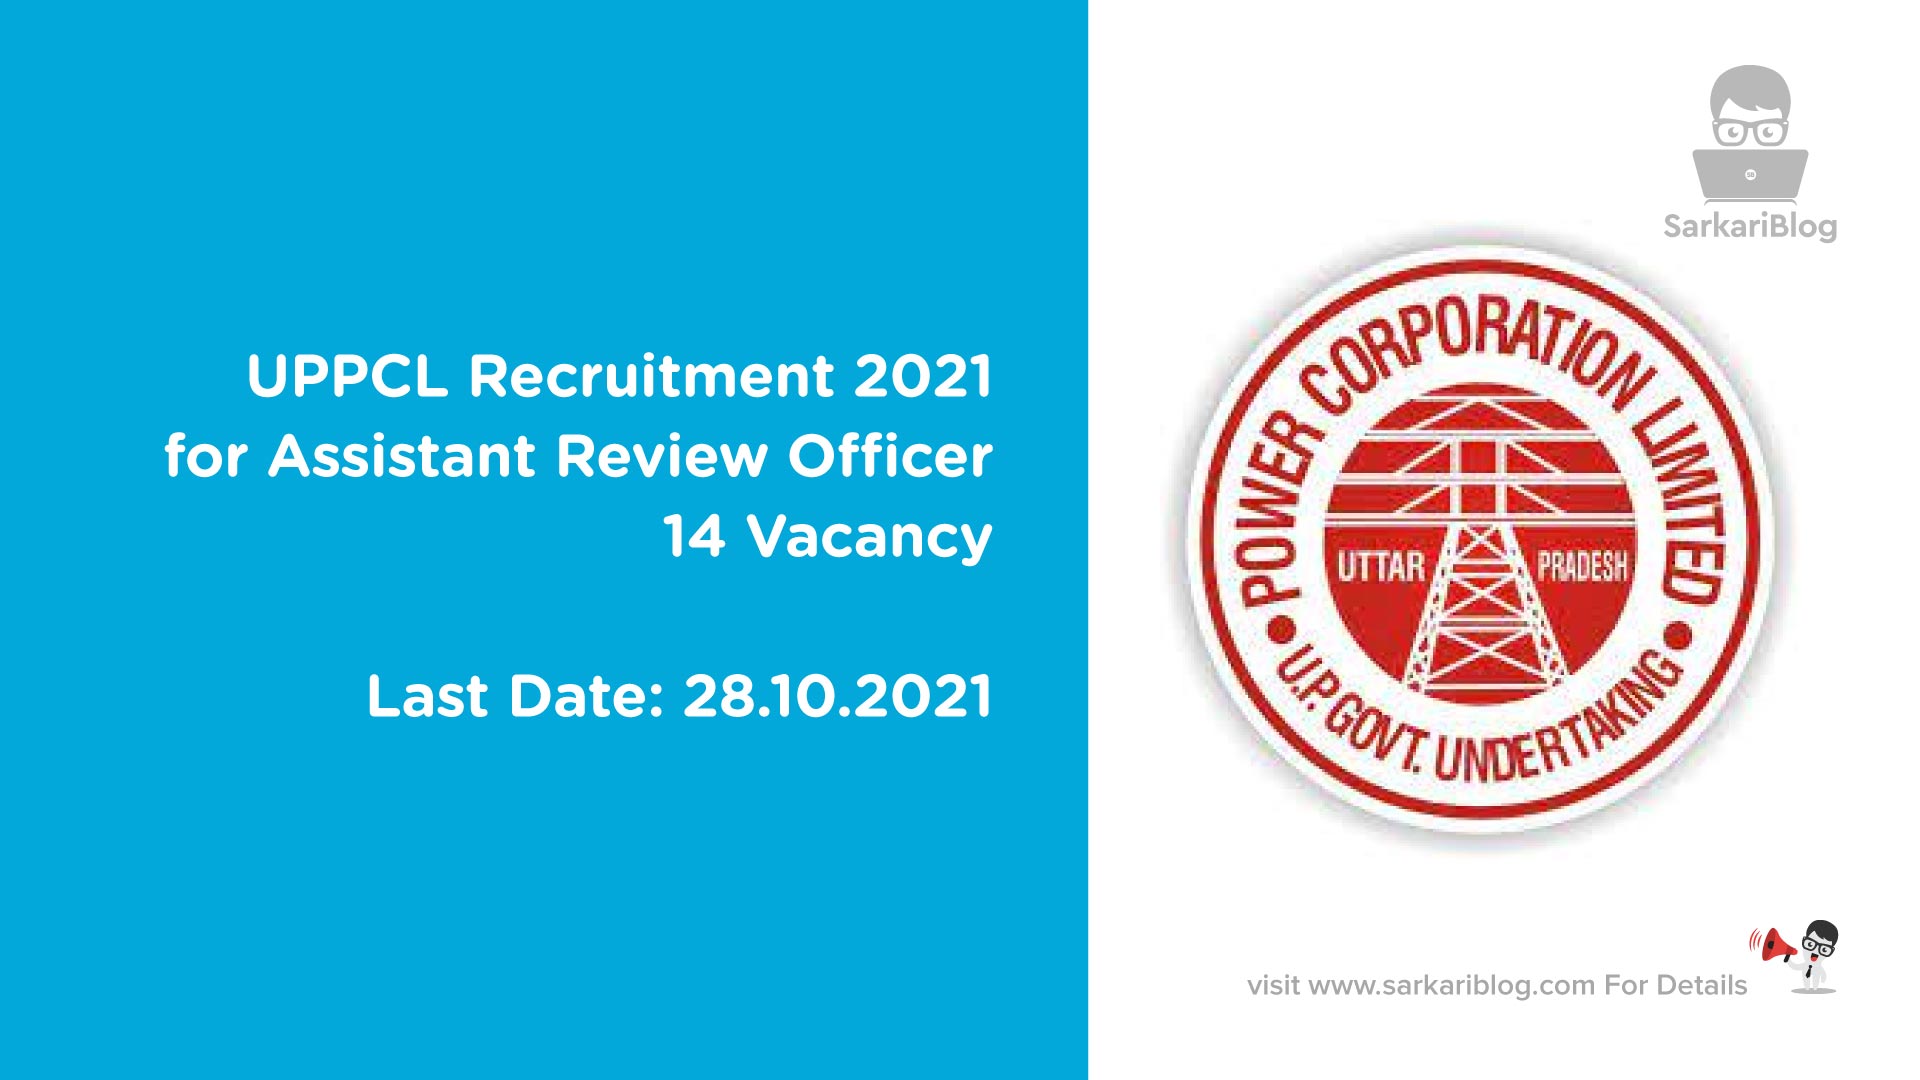 UPPCL Recruitment 2021 for Assistant Review Officer